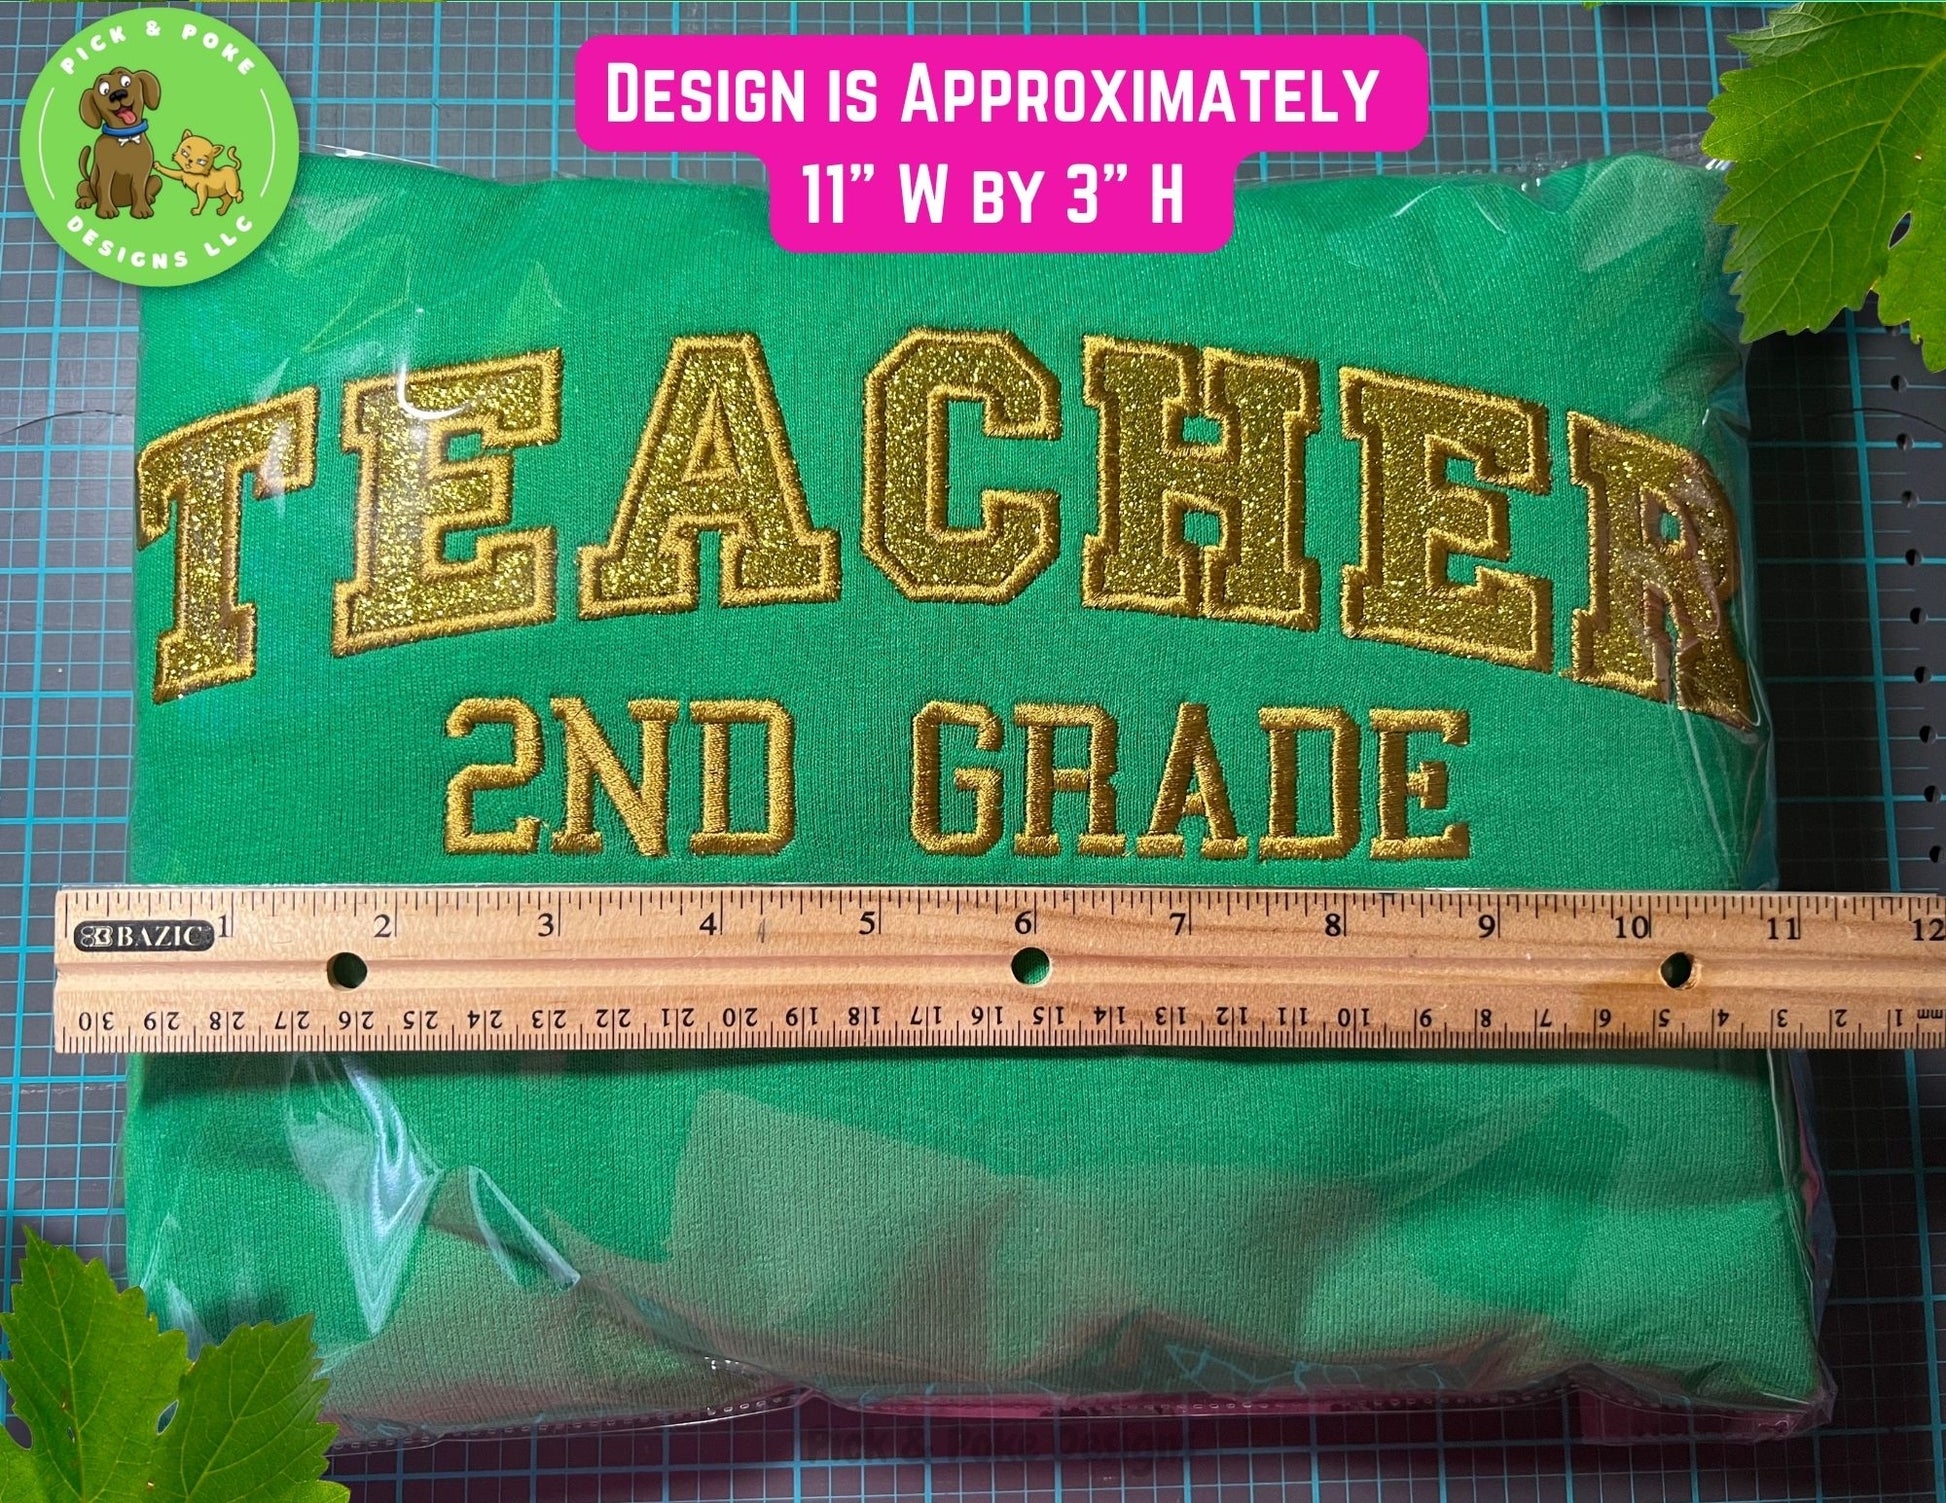 Teacher design and text measure approximately 11 inches wide by 3 inches high.